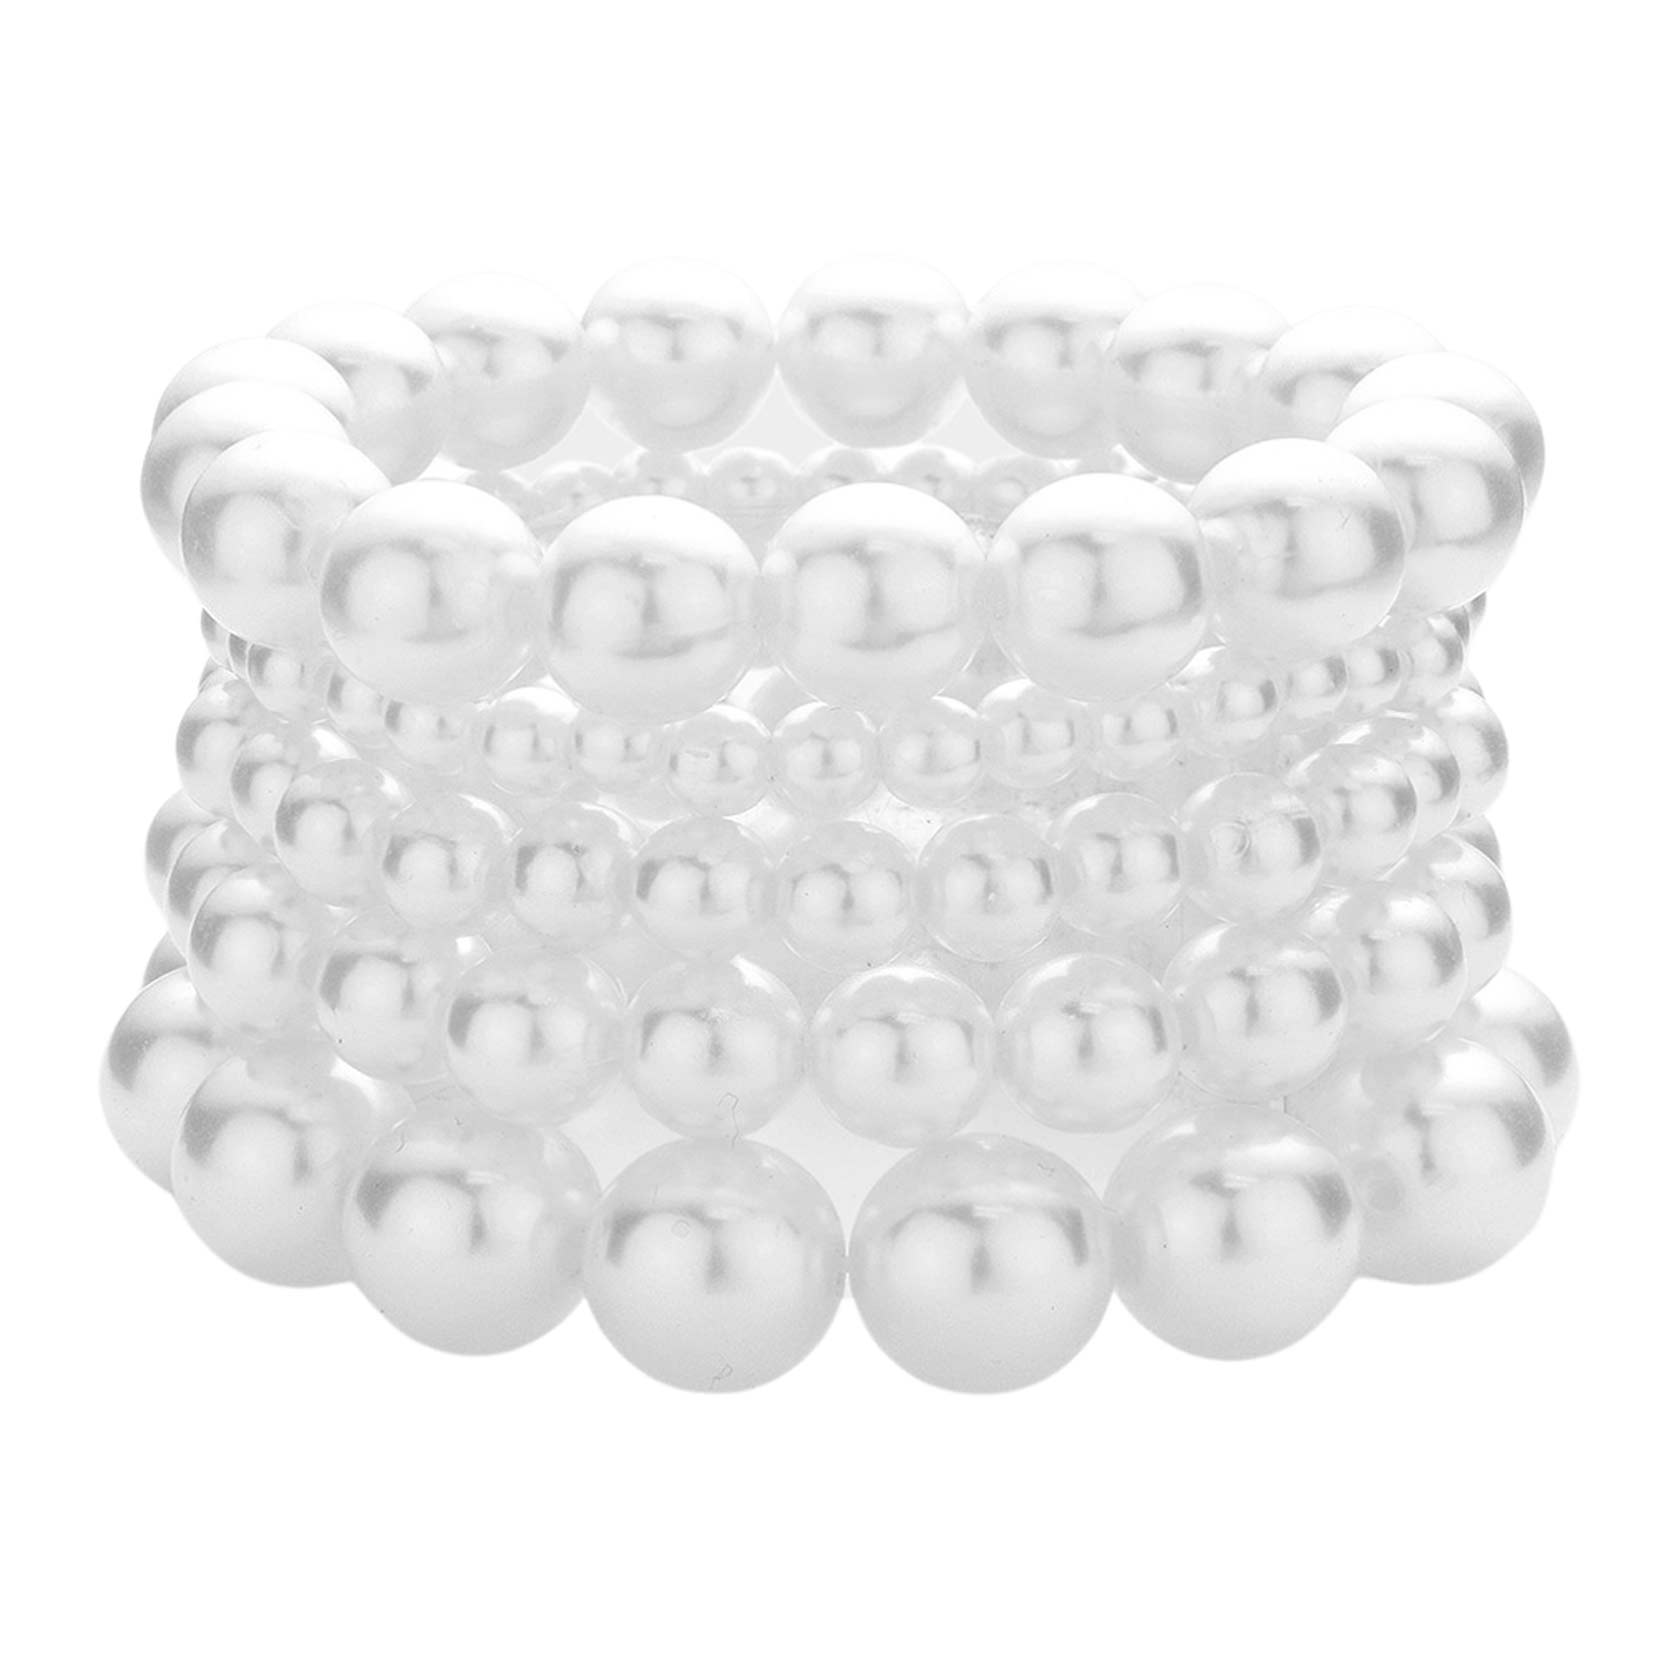 White 5PCS - Pearl Strand Stretch Bracelets, these Charm strand stretch bracelets can light up any outfit, and make you feel flawless. Perfect for adding just the right amount of shimmer & shine and a touch of class to special events. Fabulous fashion and sleek style add a pop of pretty color to your attire.